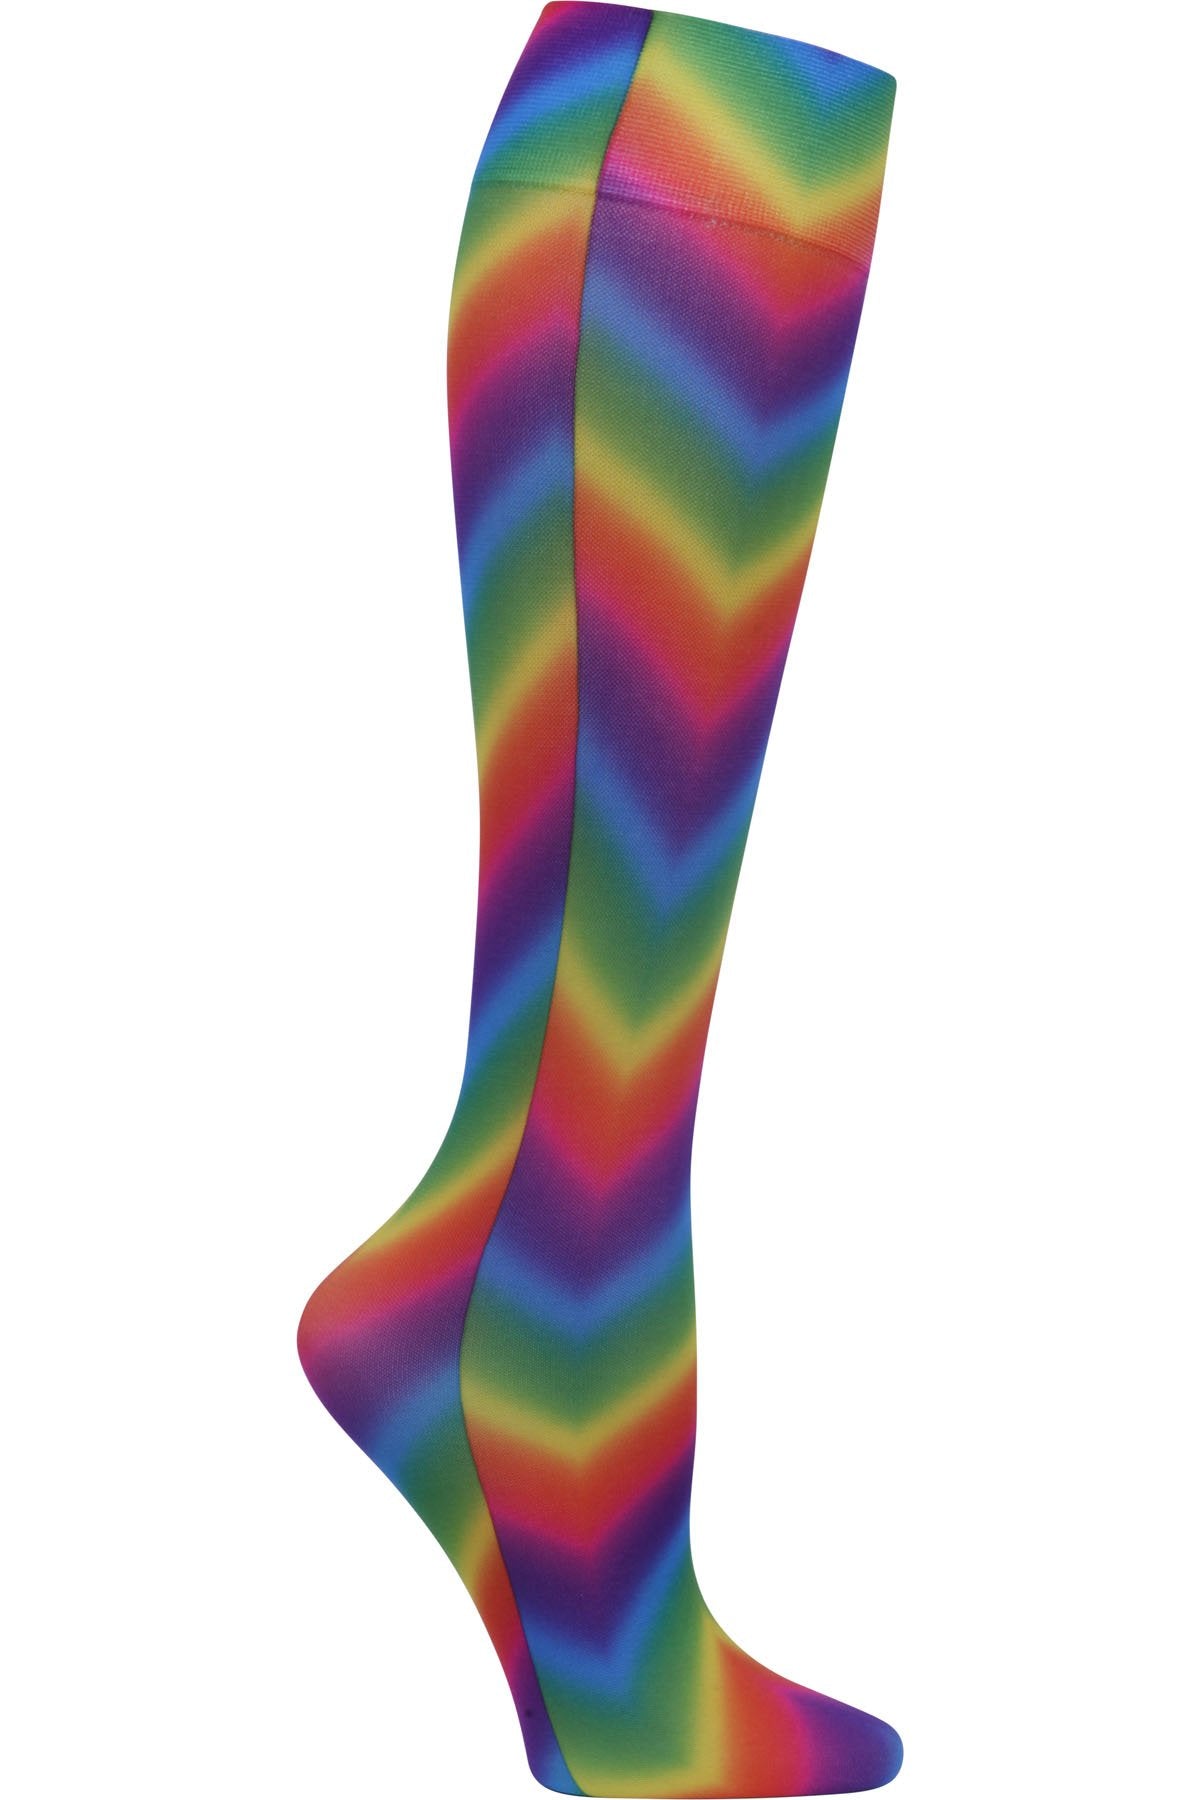 Celeste Stein Mild Compression Socks 8-15 mmHG Zigzag Rainbows at Parker's Clothing and Shoes.